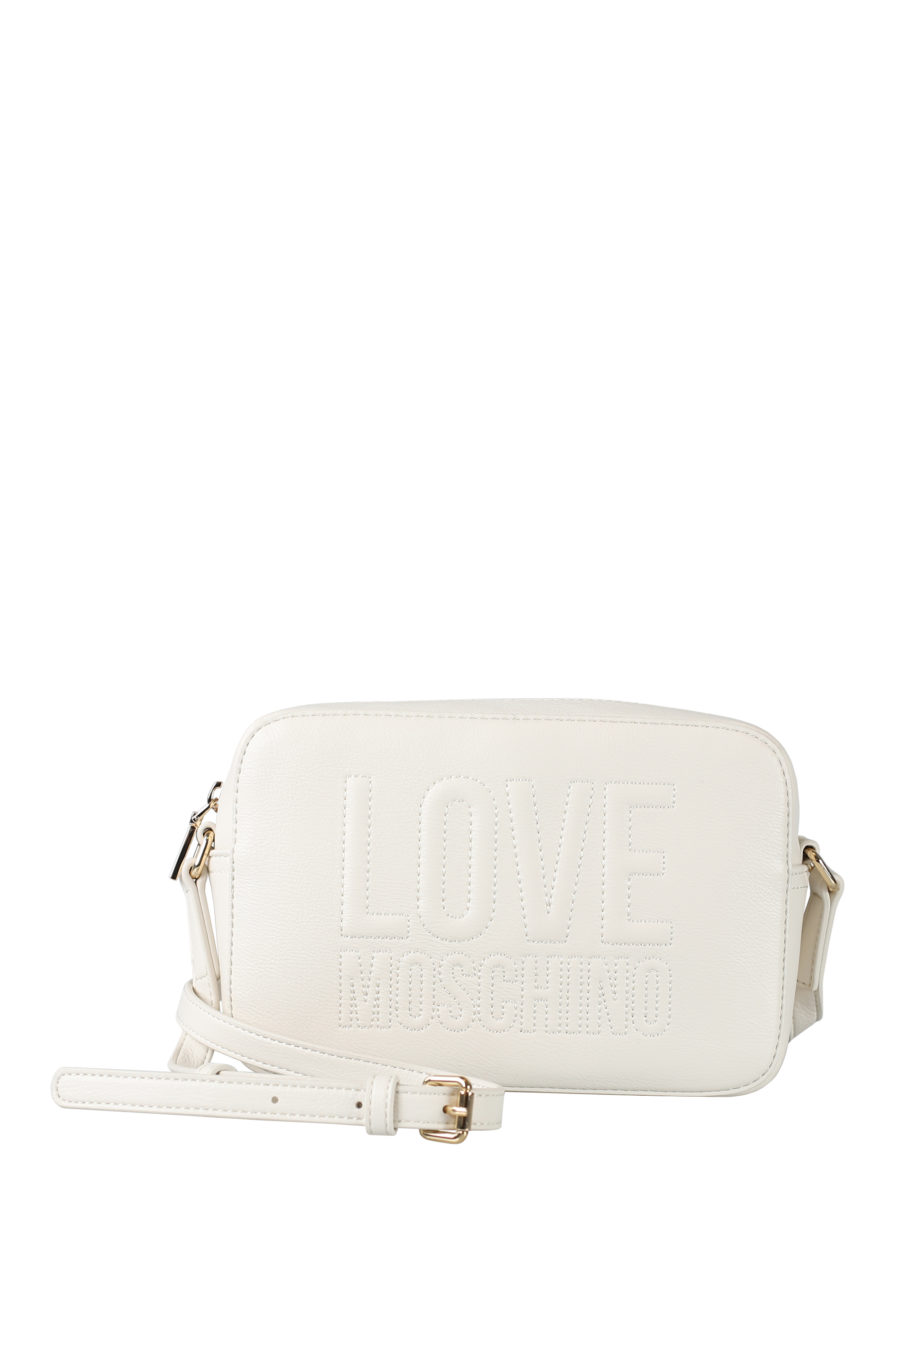 White camera bag with embroidered logo - IMG 1548